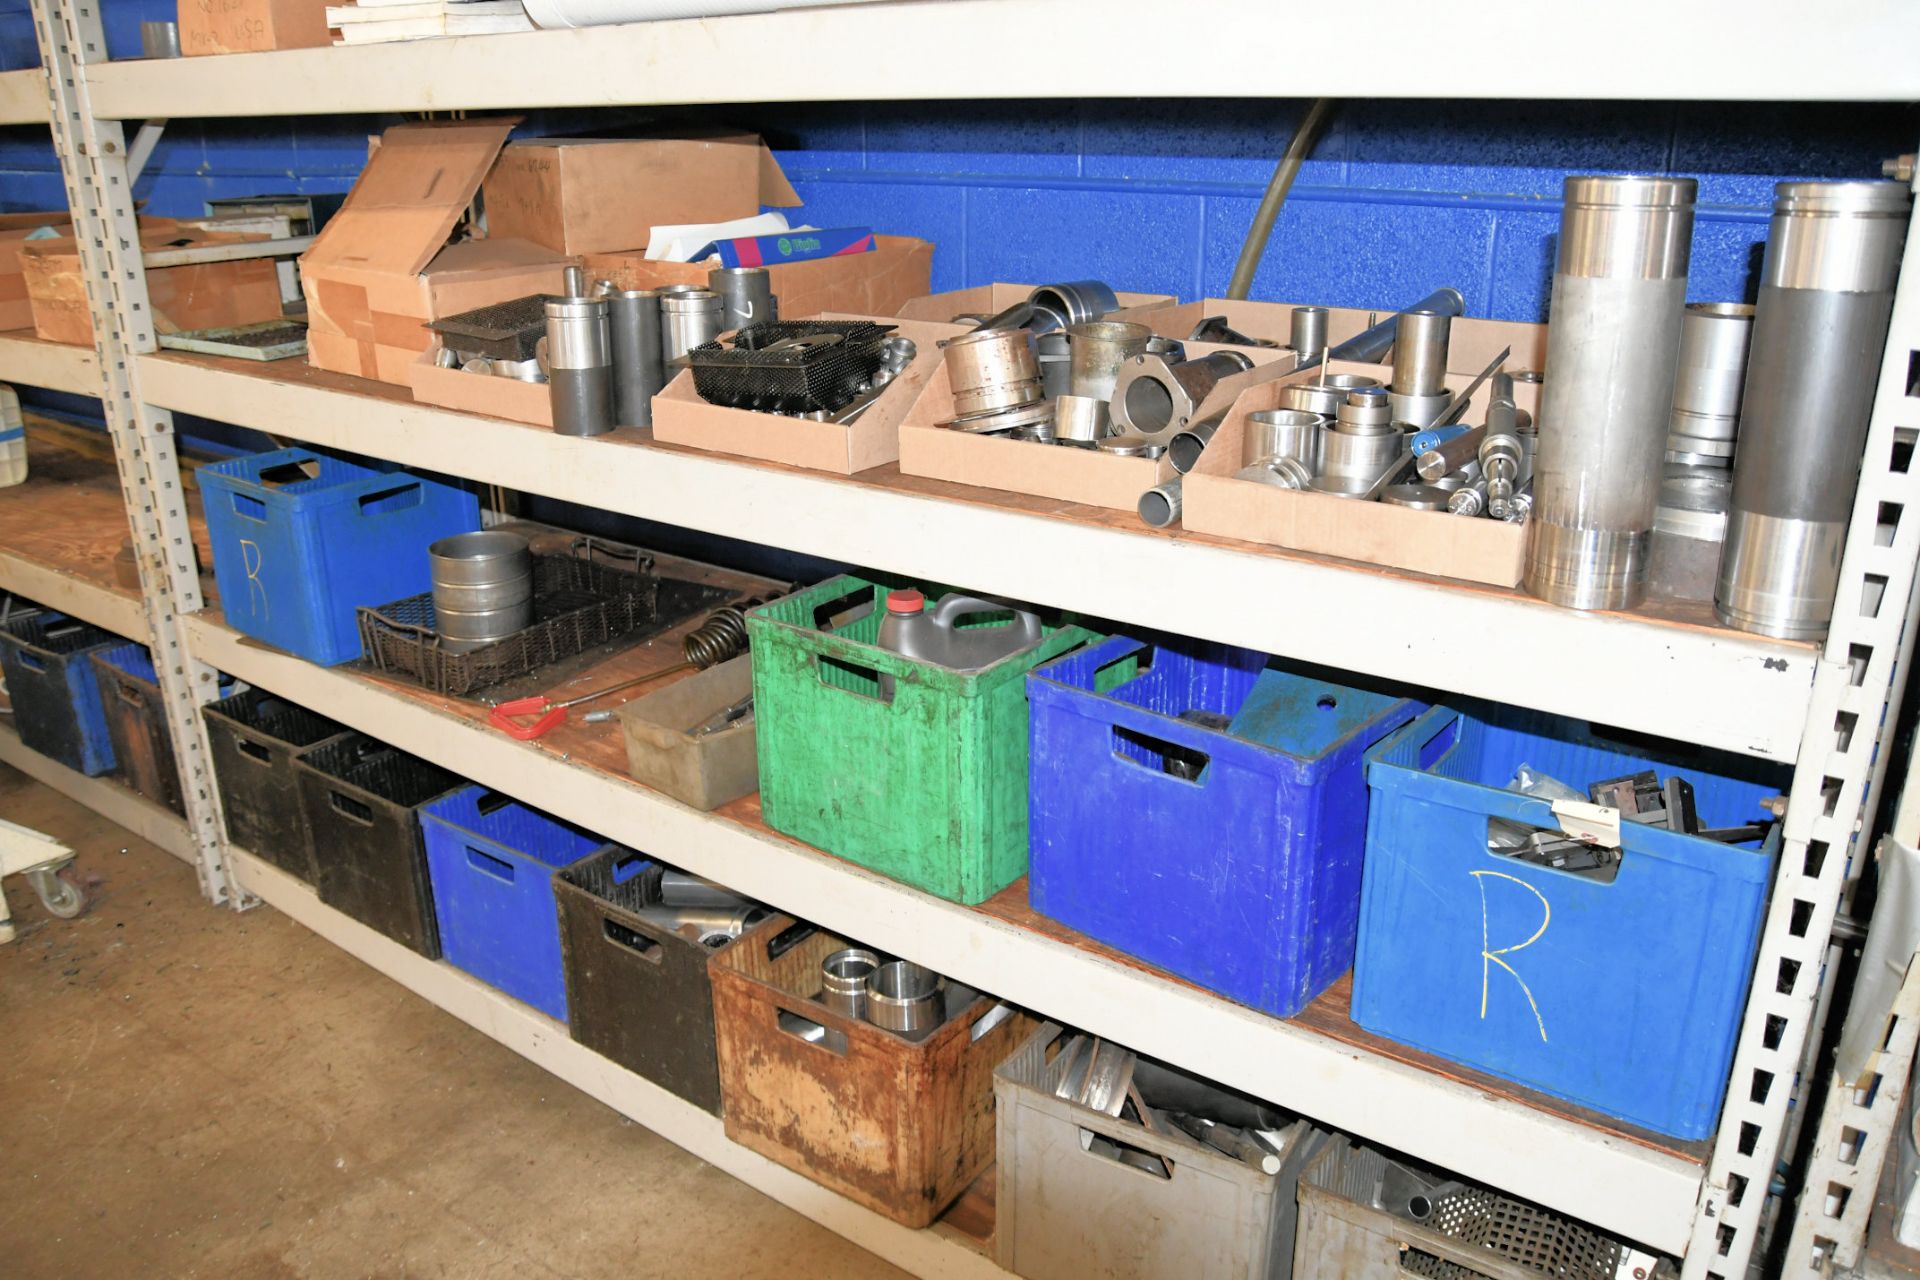 Lot-Misc. Parts in Process, Maintenance, etc. on (5) Racks, (Racks Not Included) - Image 5 of 5